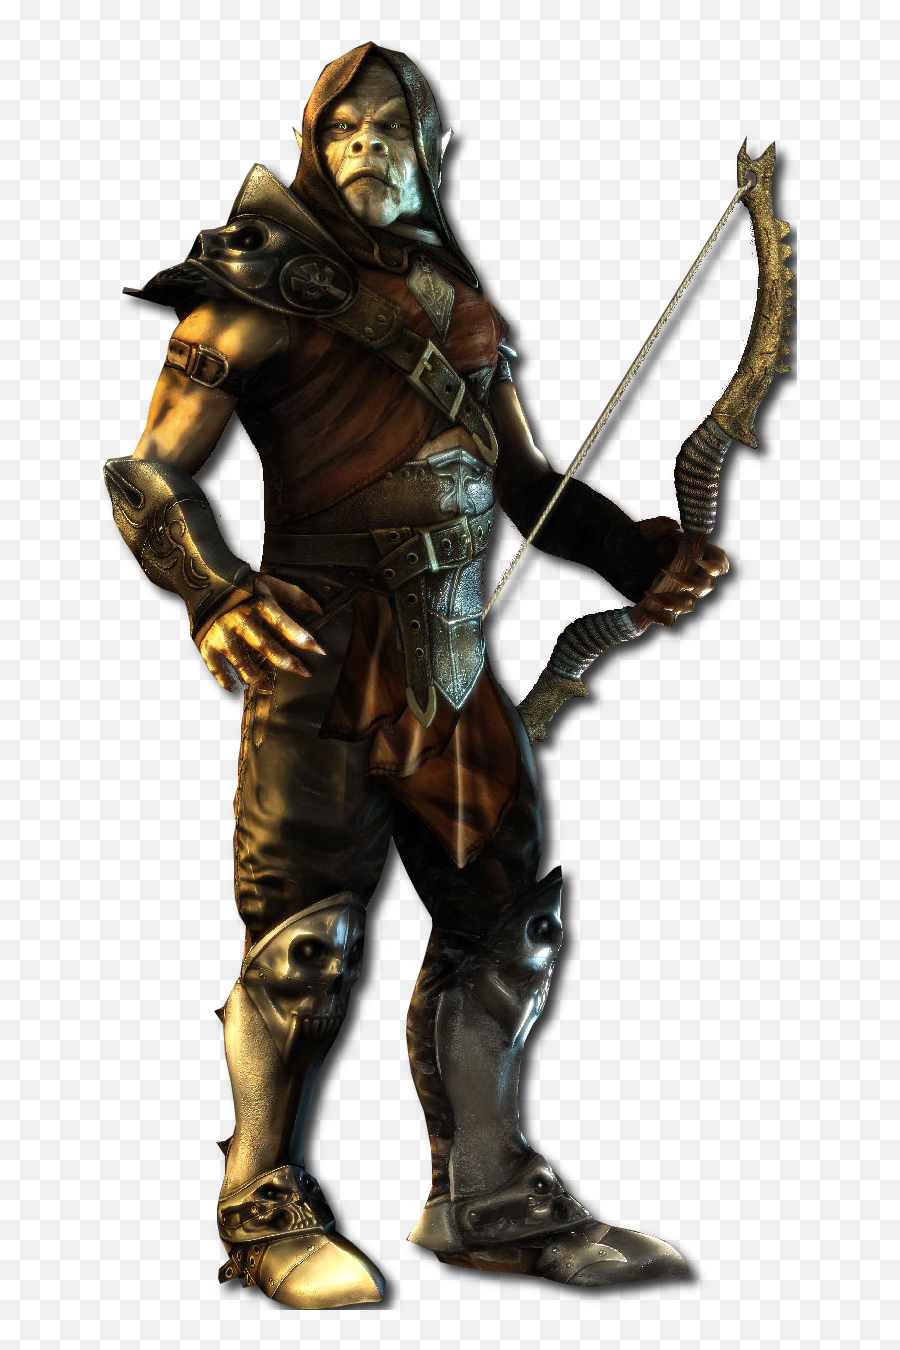 Orc Png Image For Free Download - Orc Archer No Background,Orc Png